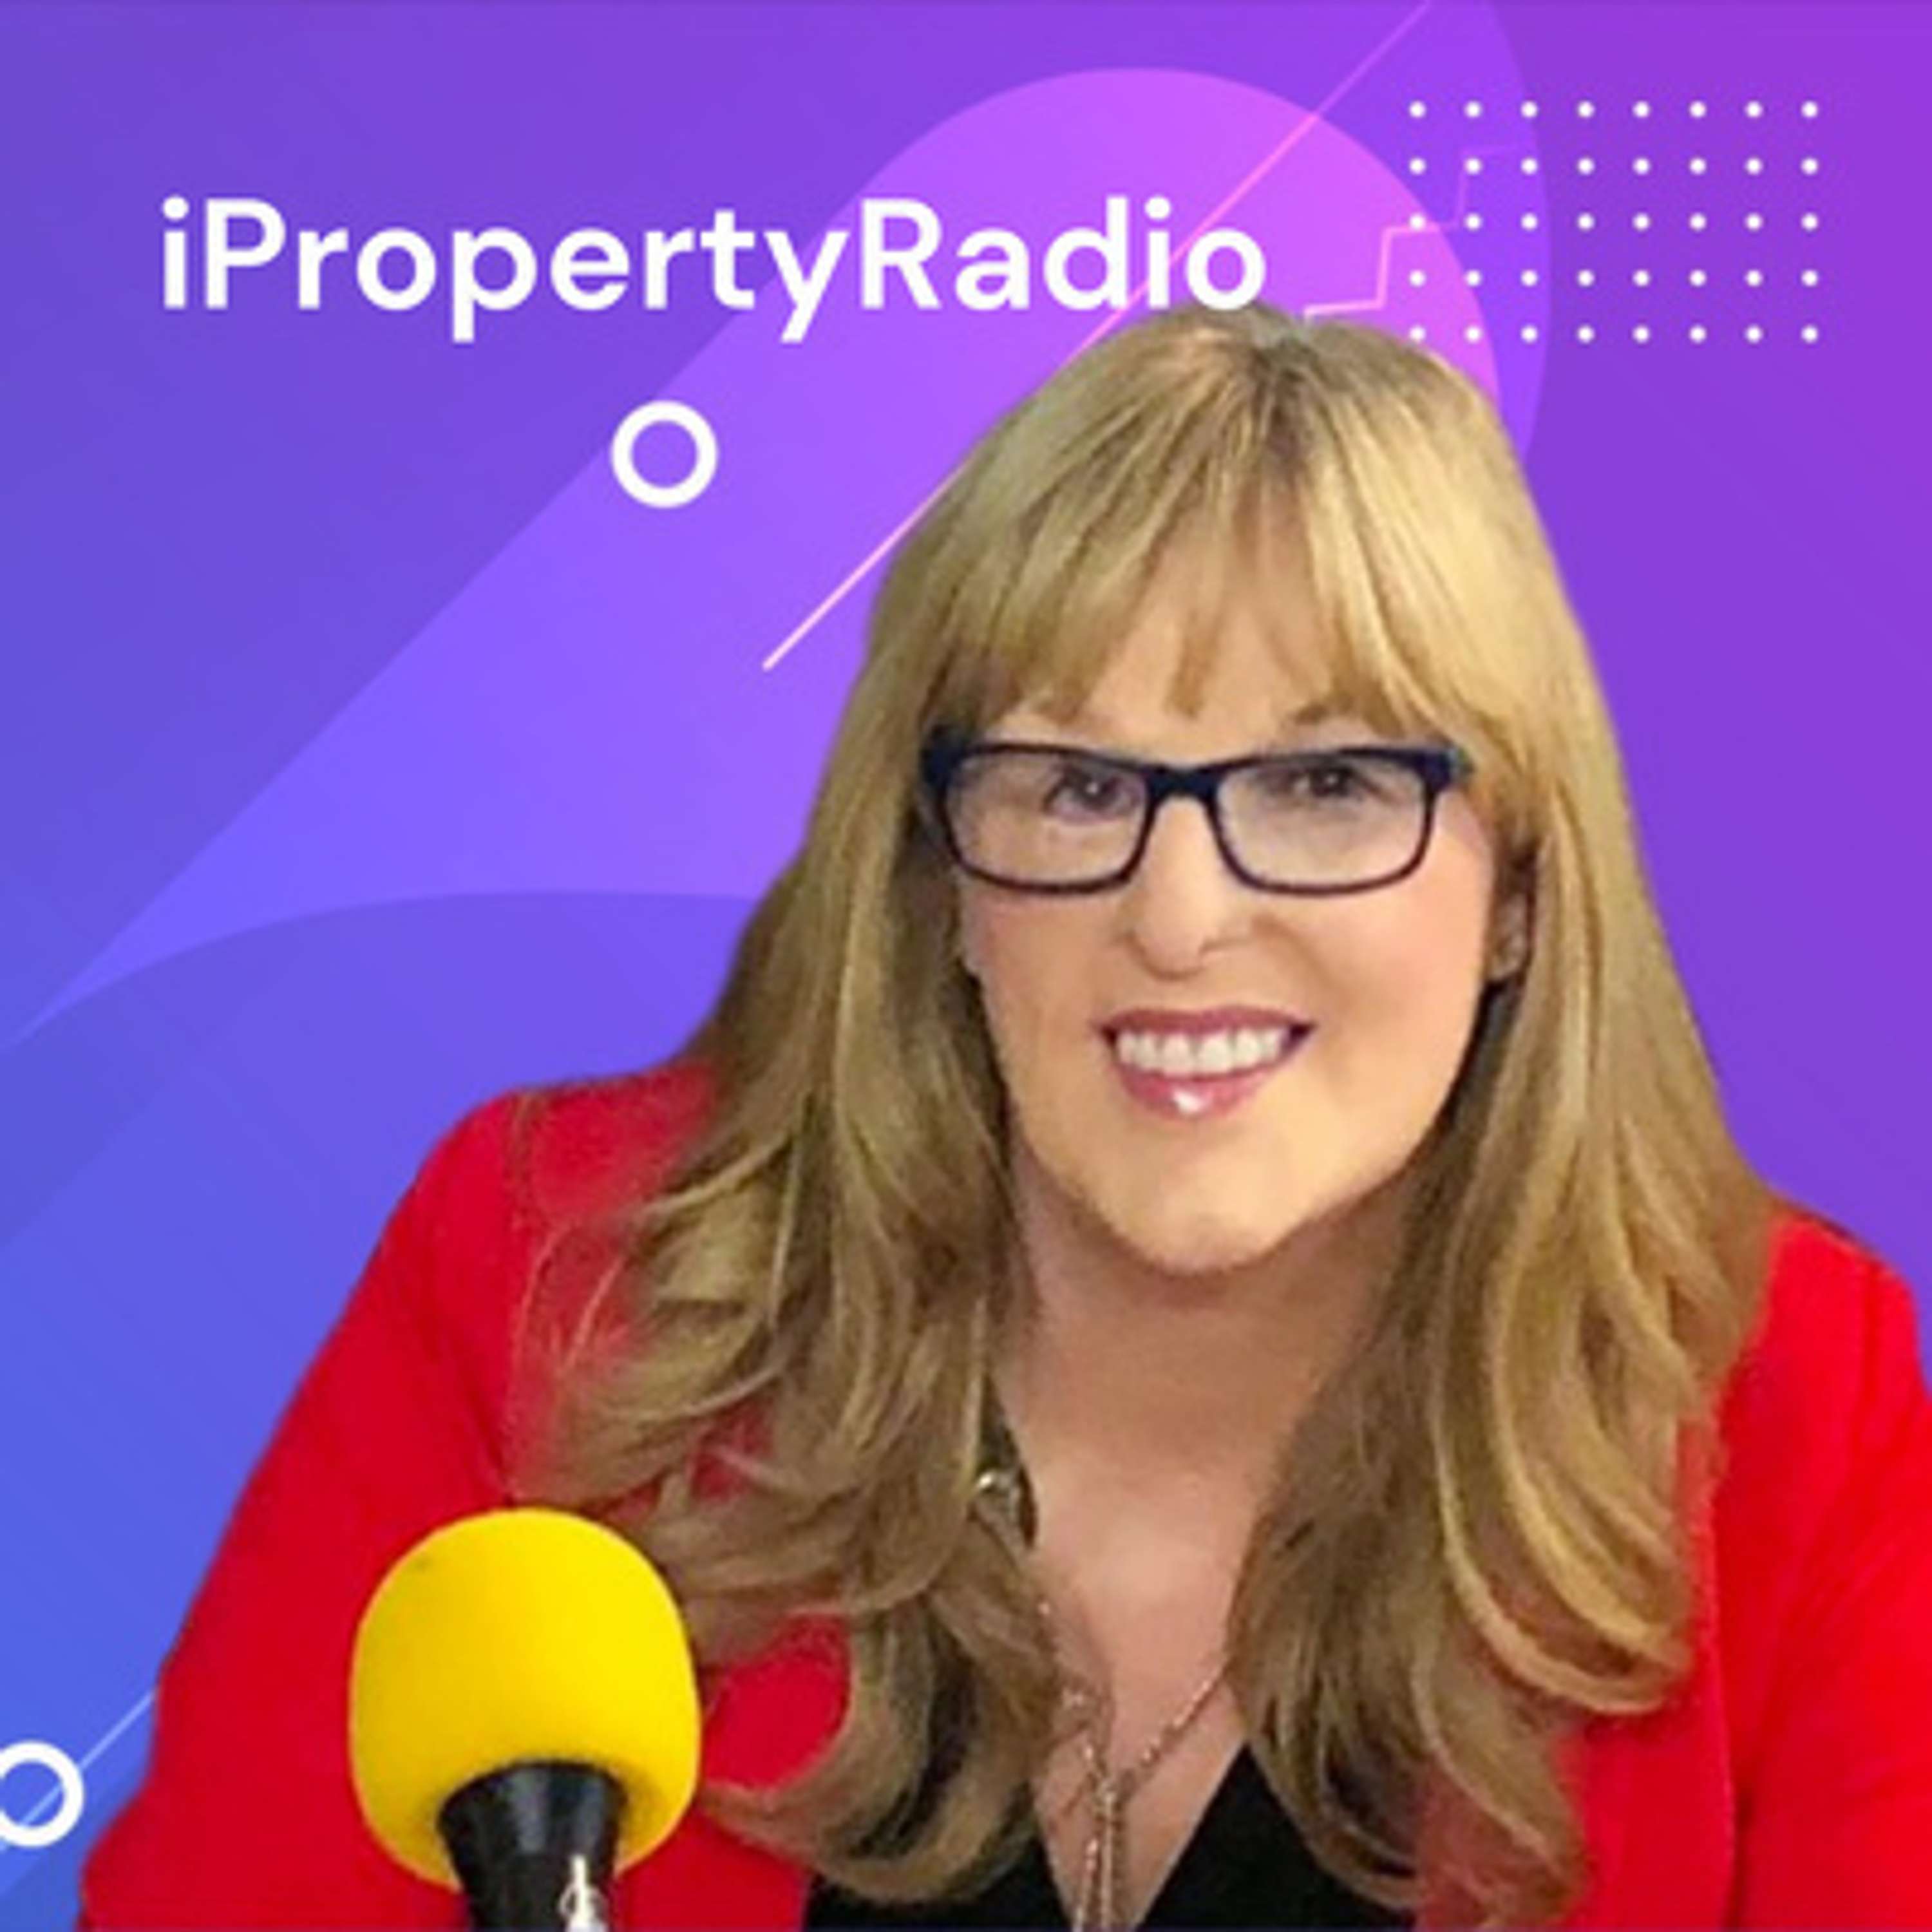 Ep.30 iPropertyRadio: Property Matters, August 20th 2019 - Owners' Management Companies Special